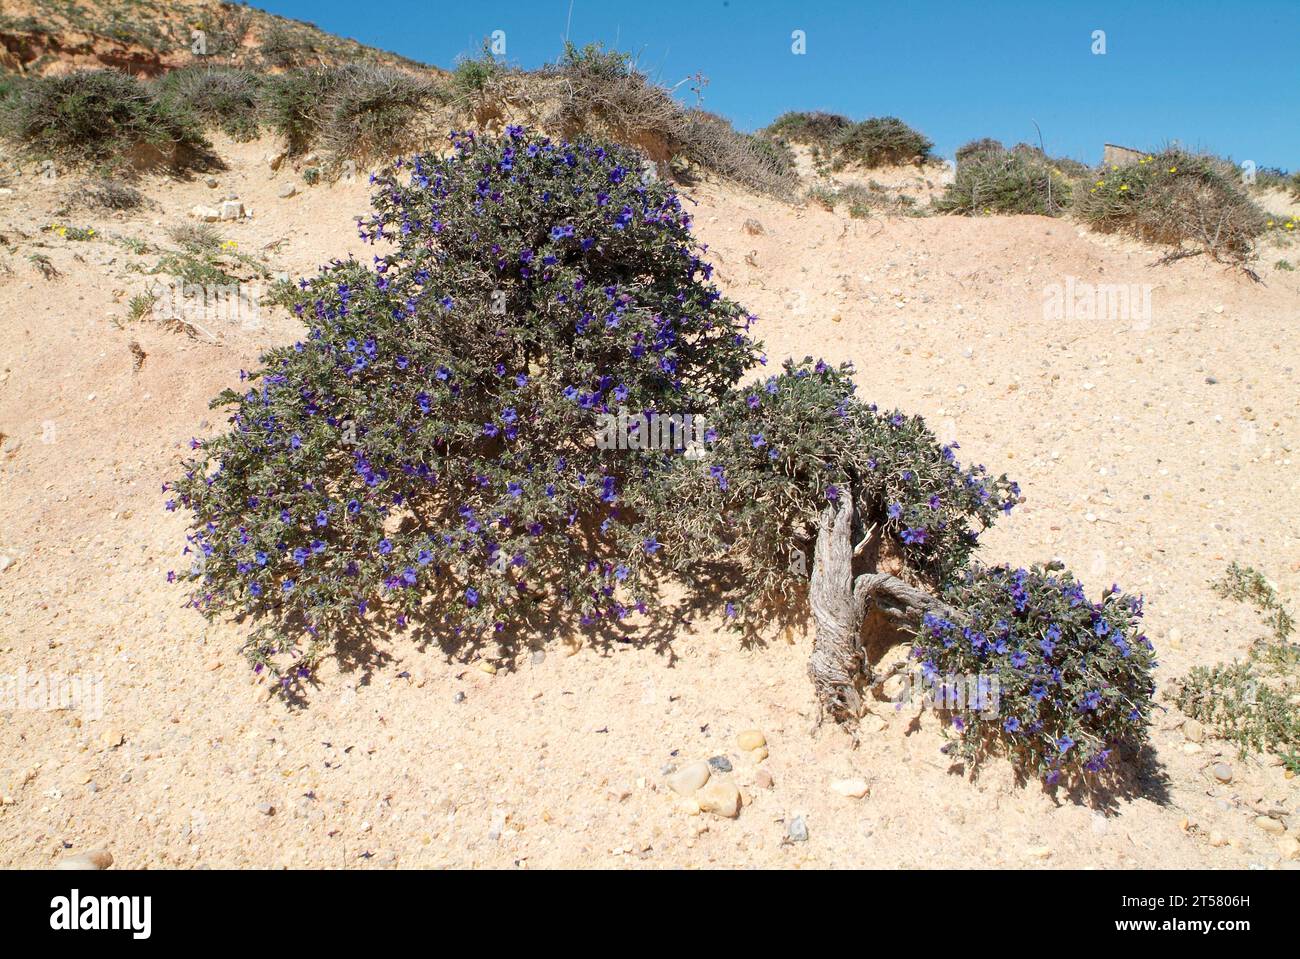 Shrubby gromwell (Lithospermum fruticosum or Lithodora fruticosa) is a small shrub (formerly medicinal) native to Spain, Portugal, France and Morocco. Stock Photo